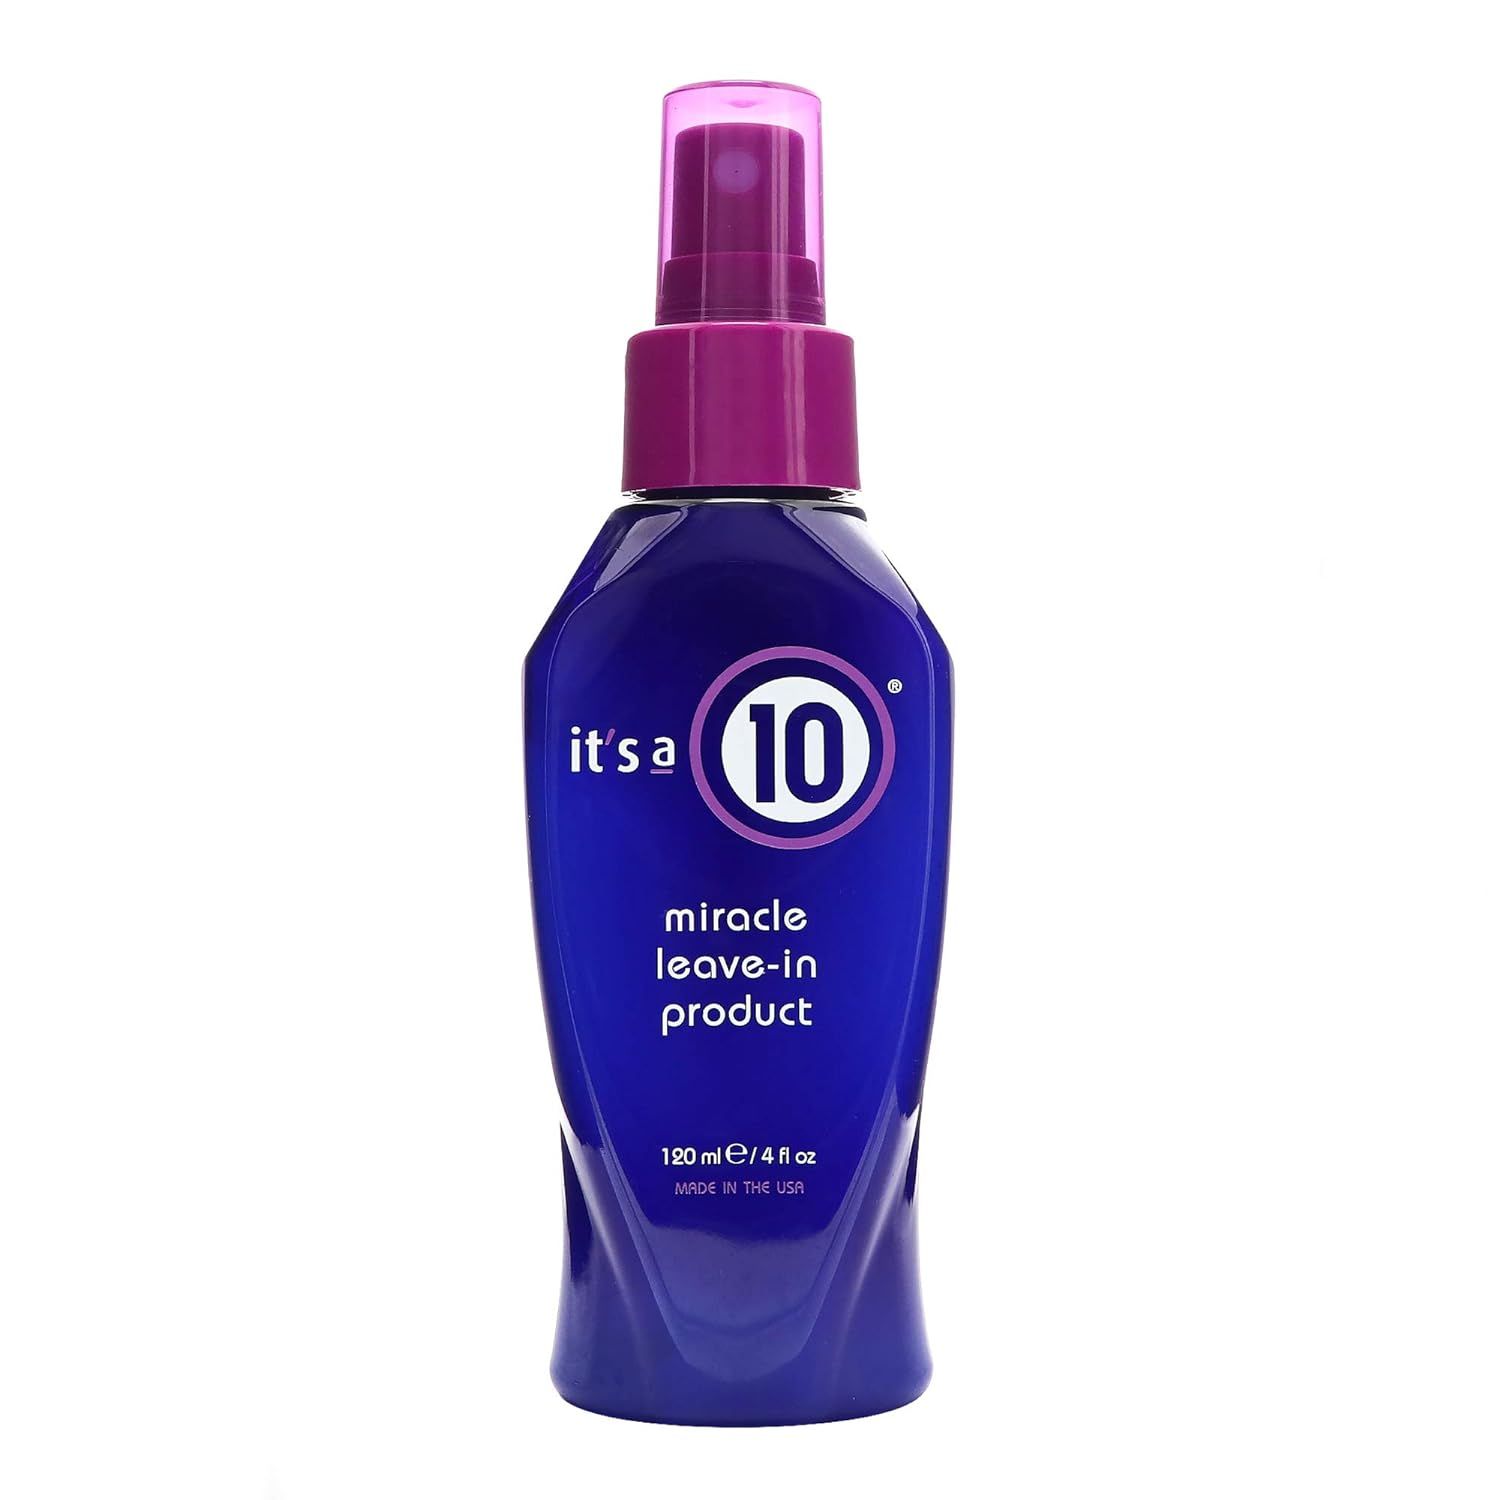 It's A 10 Haircare Miracle Leave-In Conditioner Spray - 4 oz. - 1ct | Amazon (US)